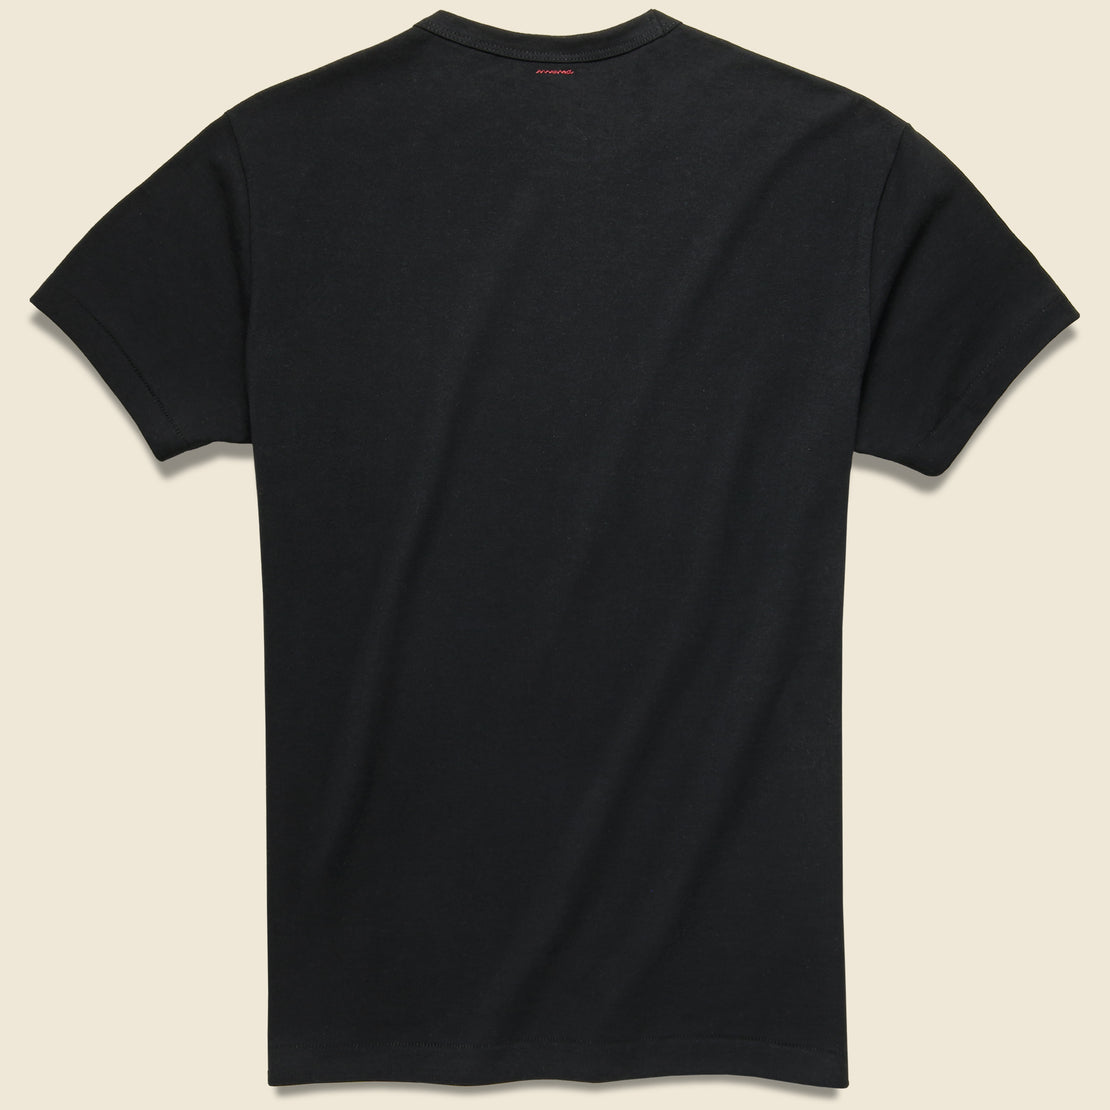 Todd Snyder + Champion - Wing Foot Tee - Black - Todd Snyder - STAG Provisions - Tops - Graphic Tee